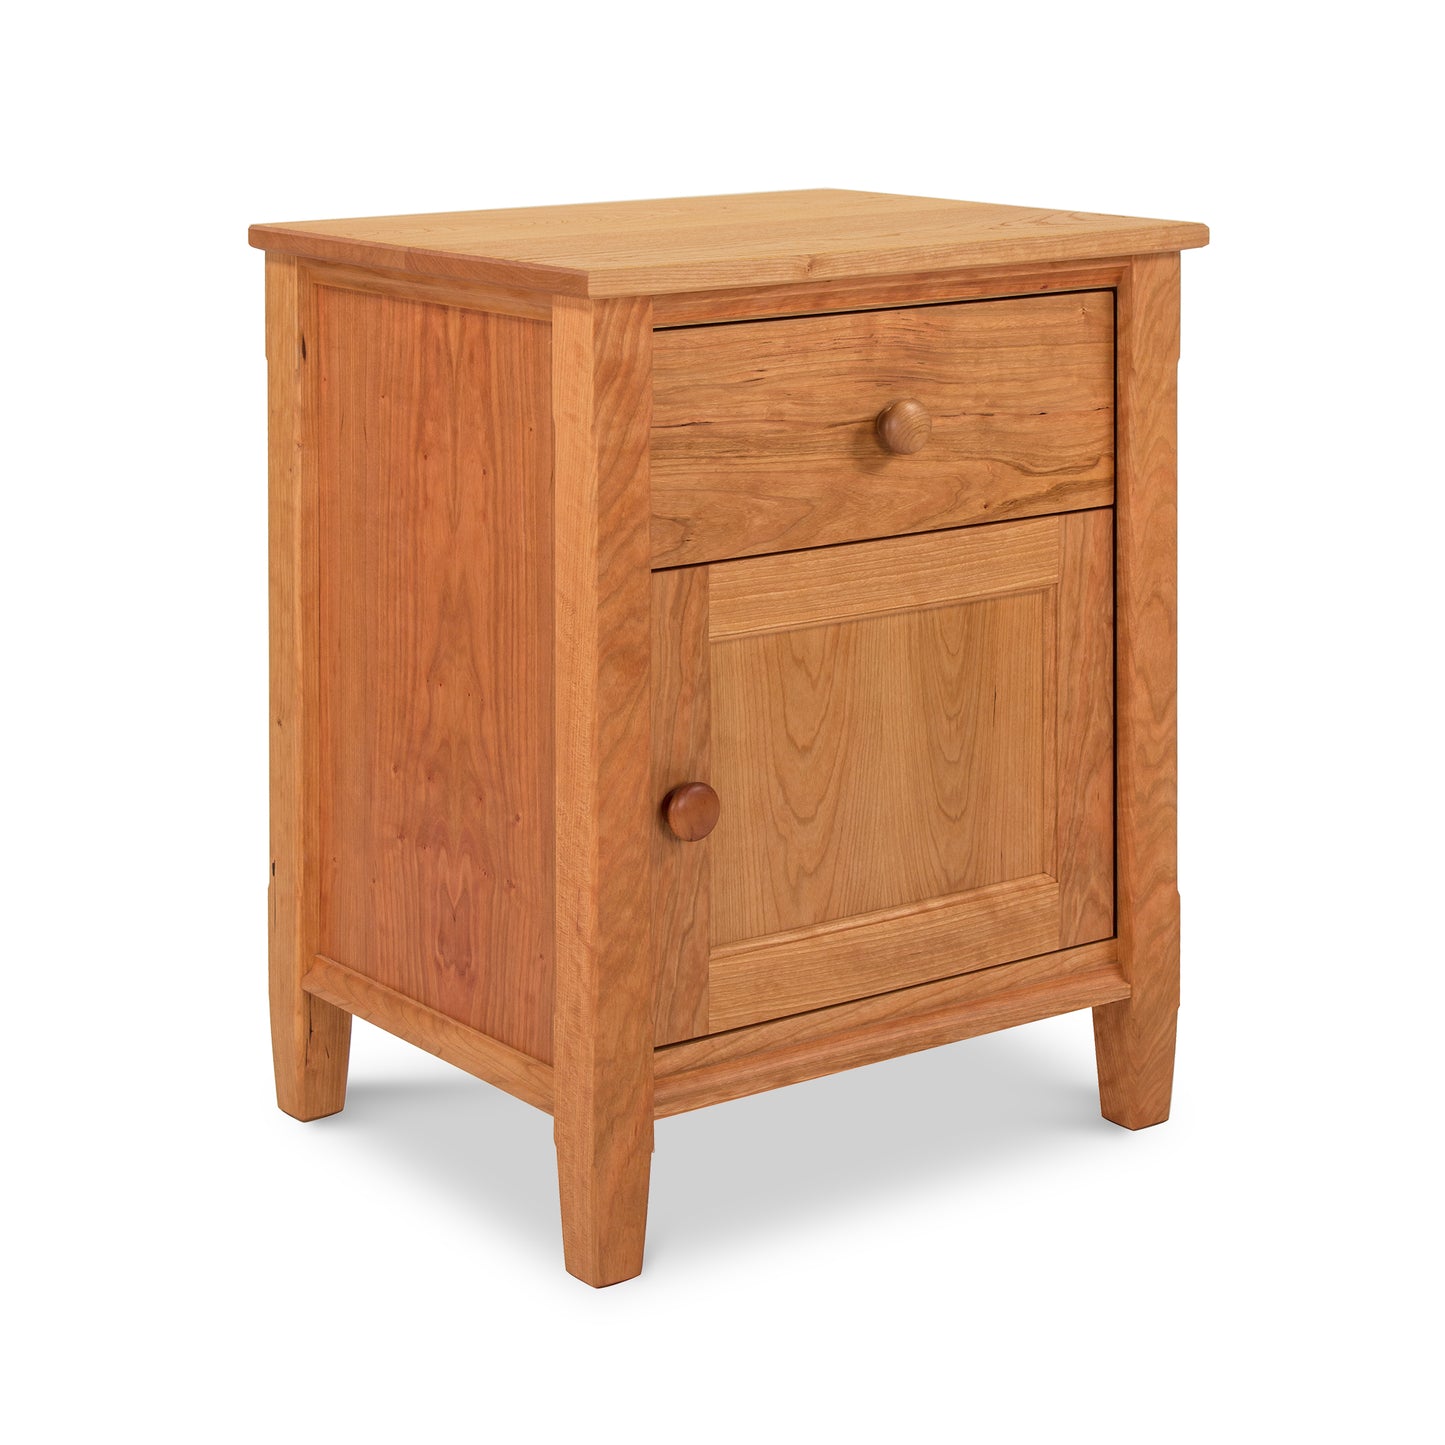 A Maple Corner Woodworks Vermont Shaker 1-Drawer Nightstand with Door, crafted from natural cherry wood, isolated on a white background.